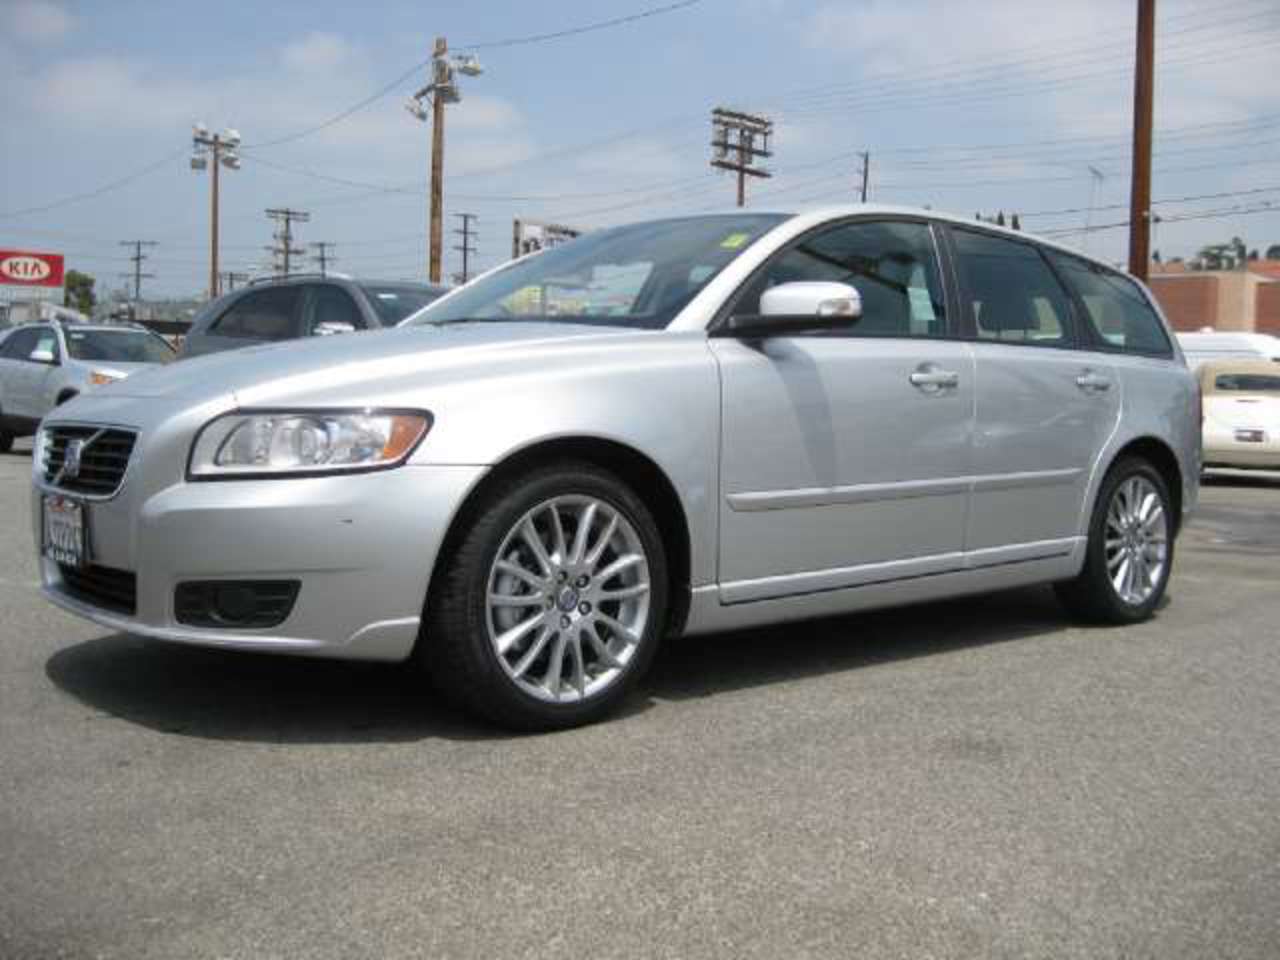 Volvo V50 24i. View Download Wallpaper. 640x480. Comments